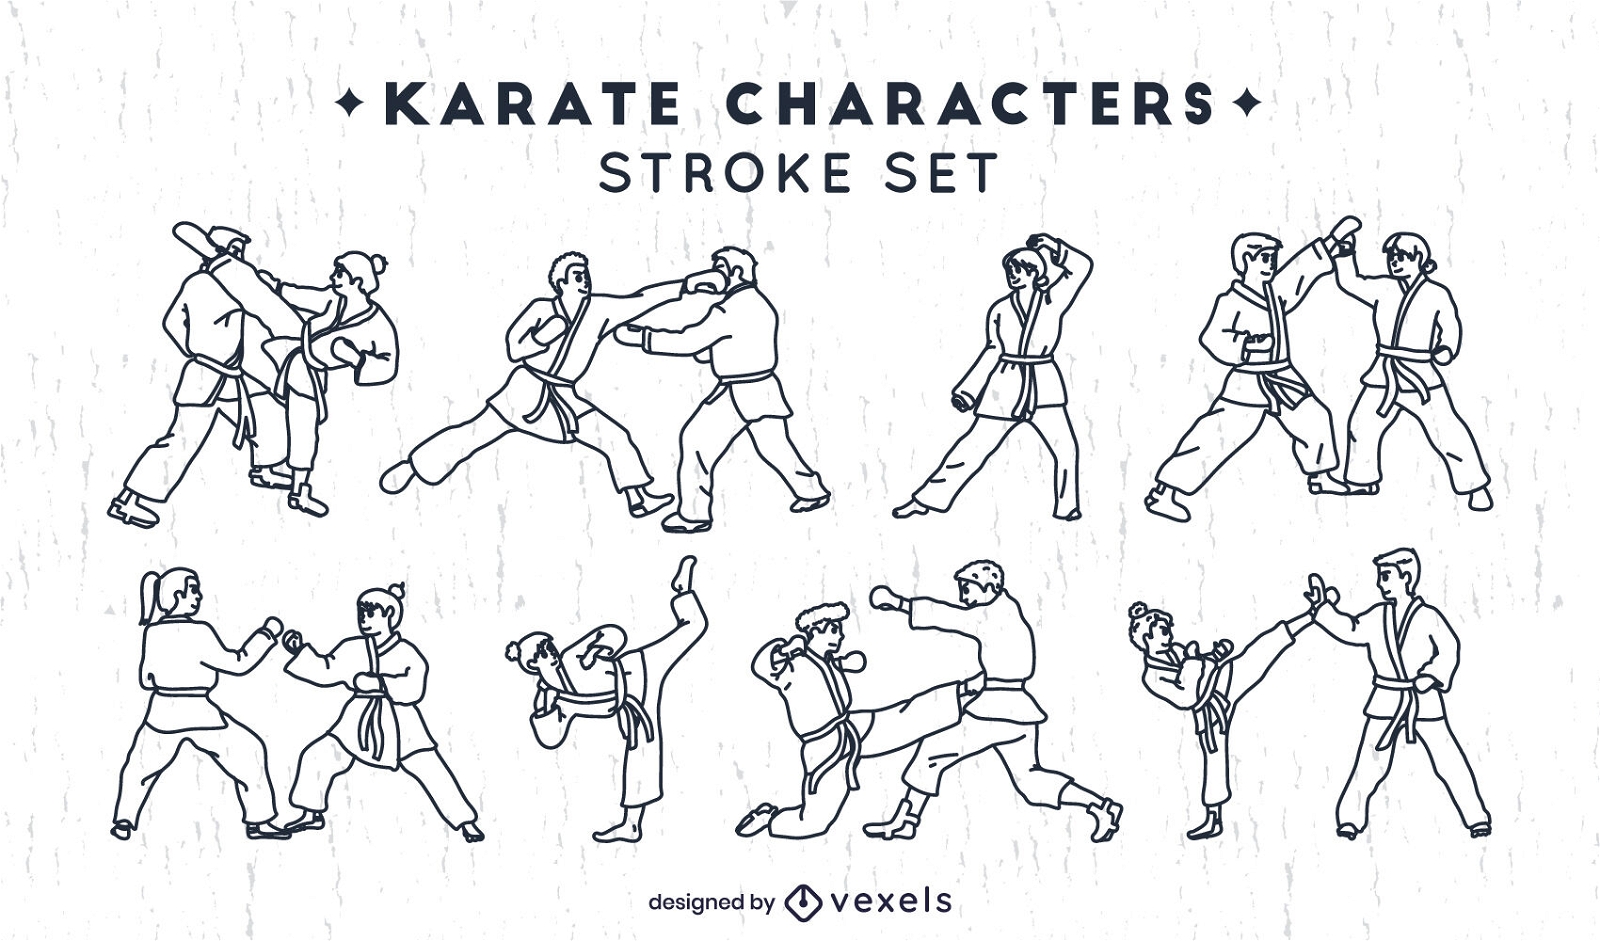 Karate characters set of items stroke